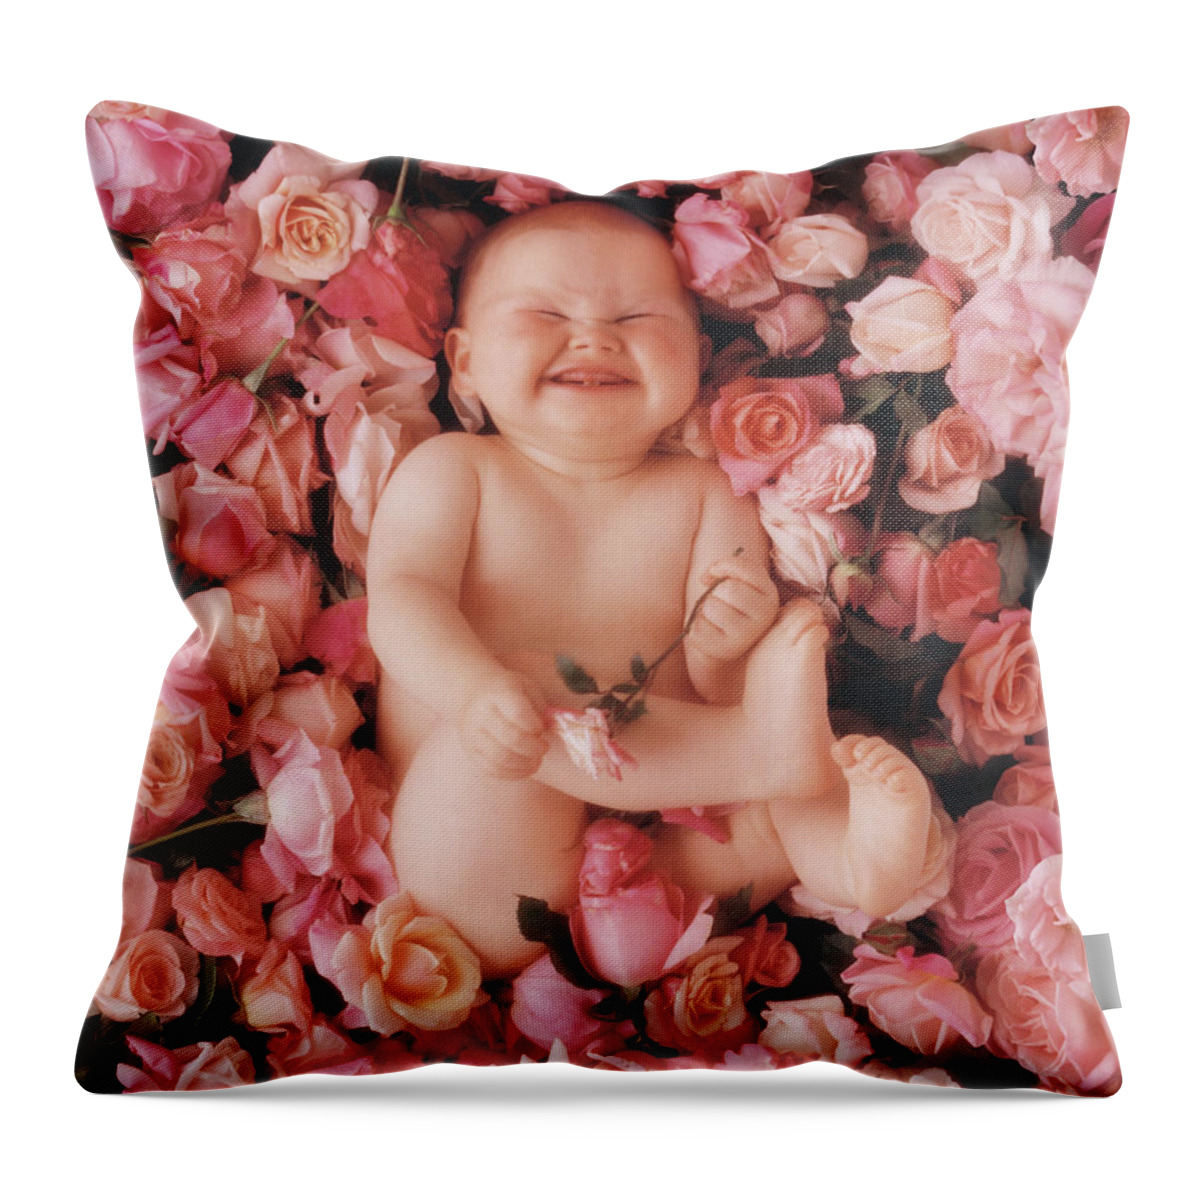 Roses Throw Pillow featuring the photograph Cheesecake by Anne Geddes